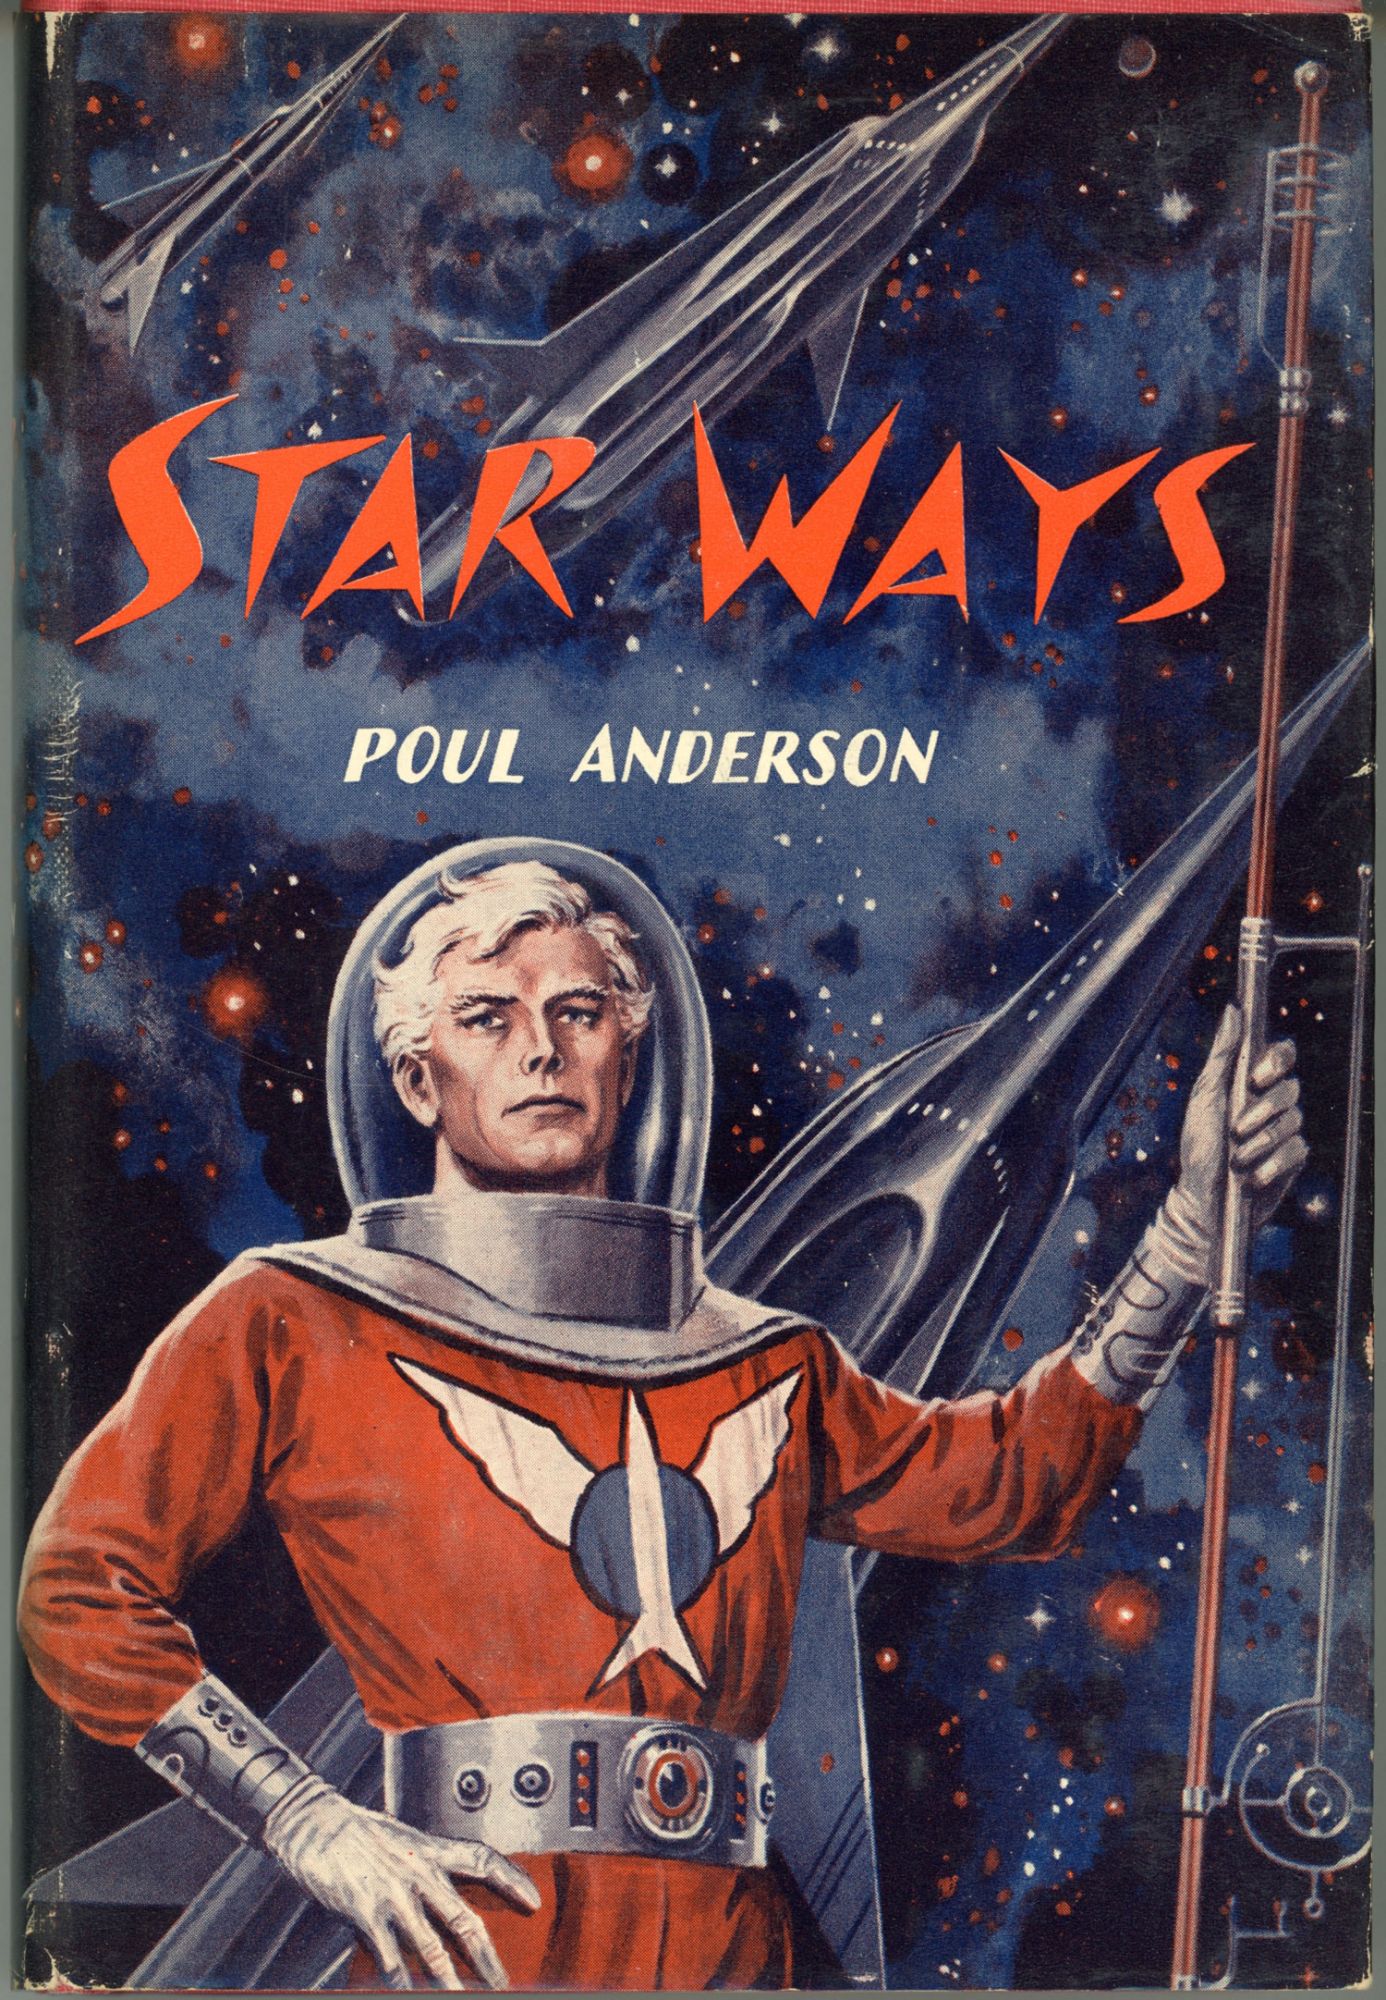 Image - Star Ways by Poul Anderson